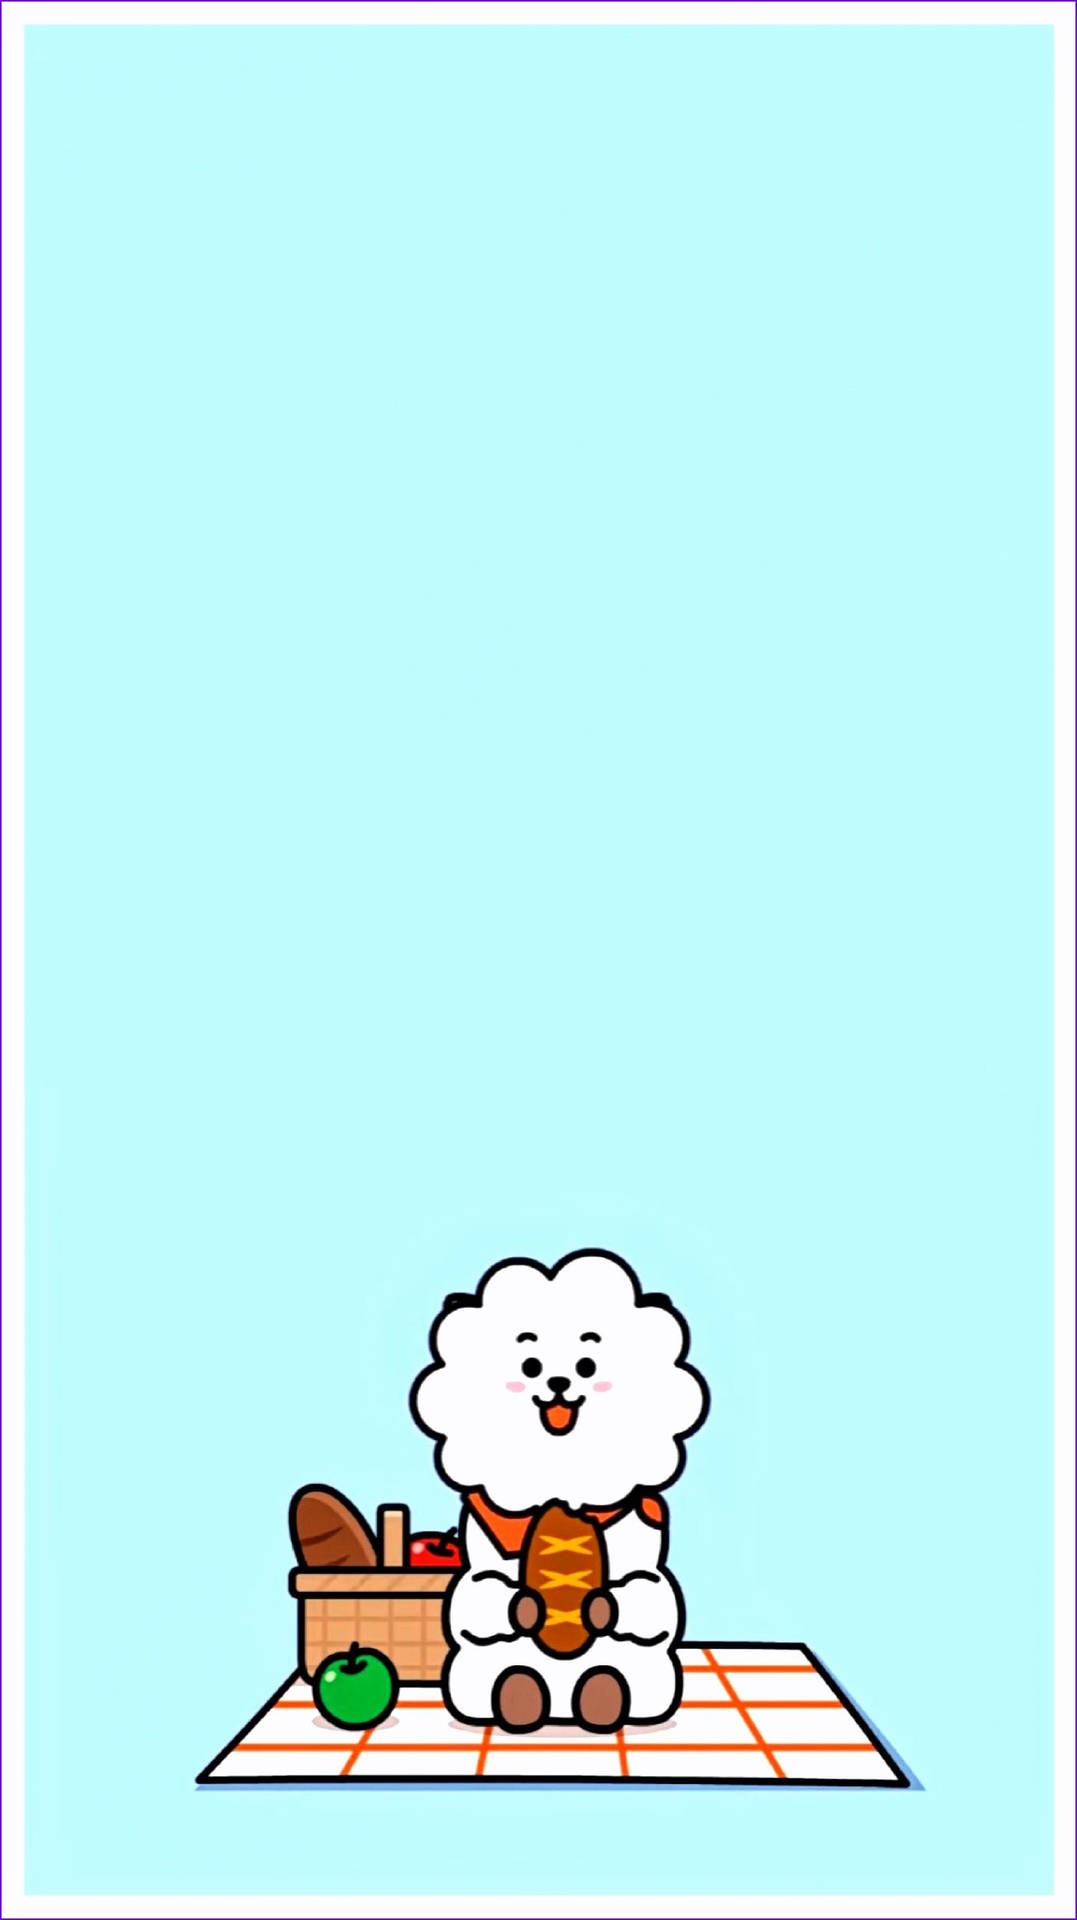 Top 999+ Cute Bt21 Wallpapers Full HD, 4K✅Free to Use